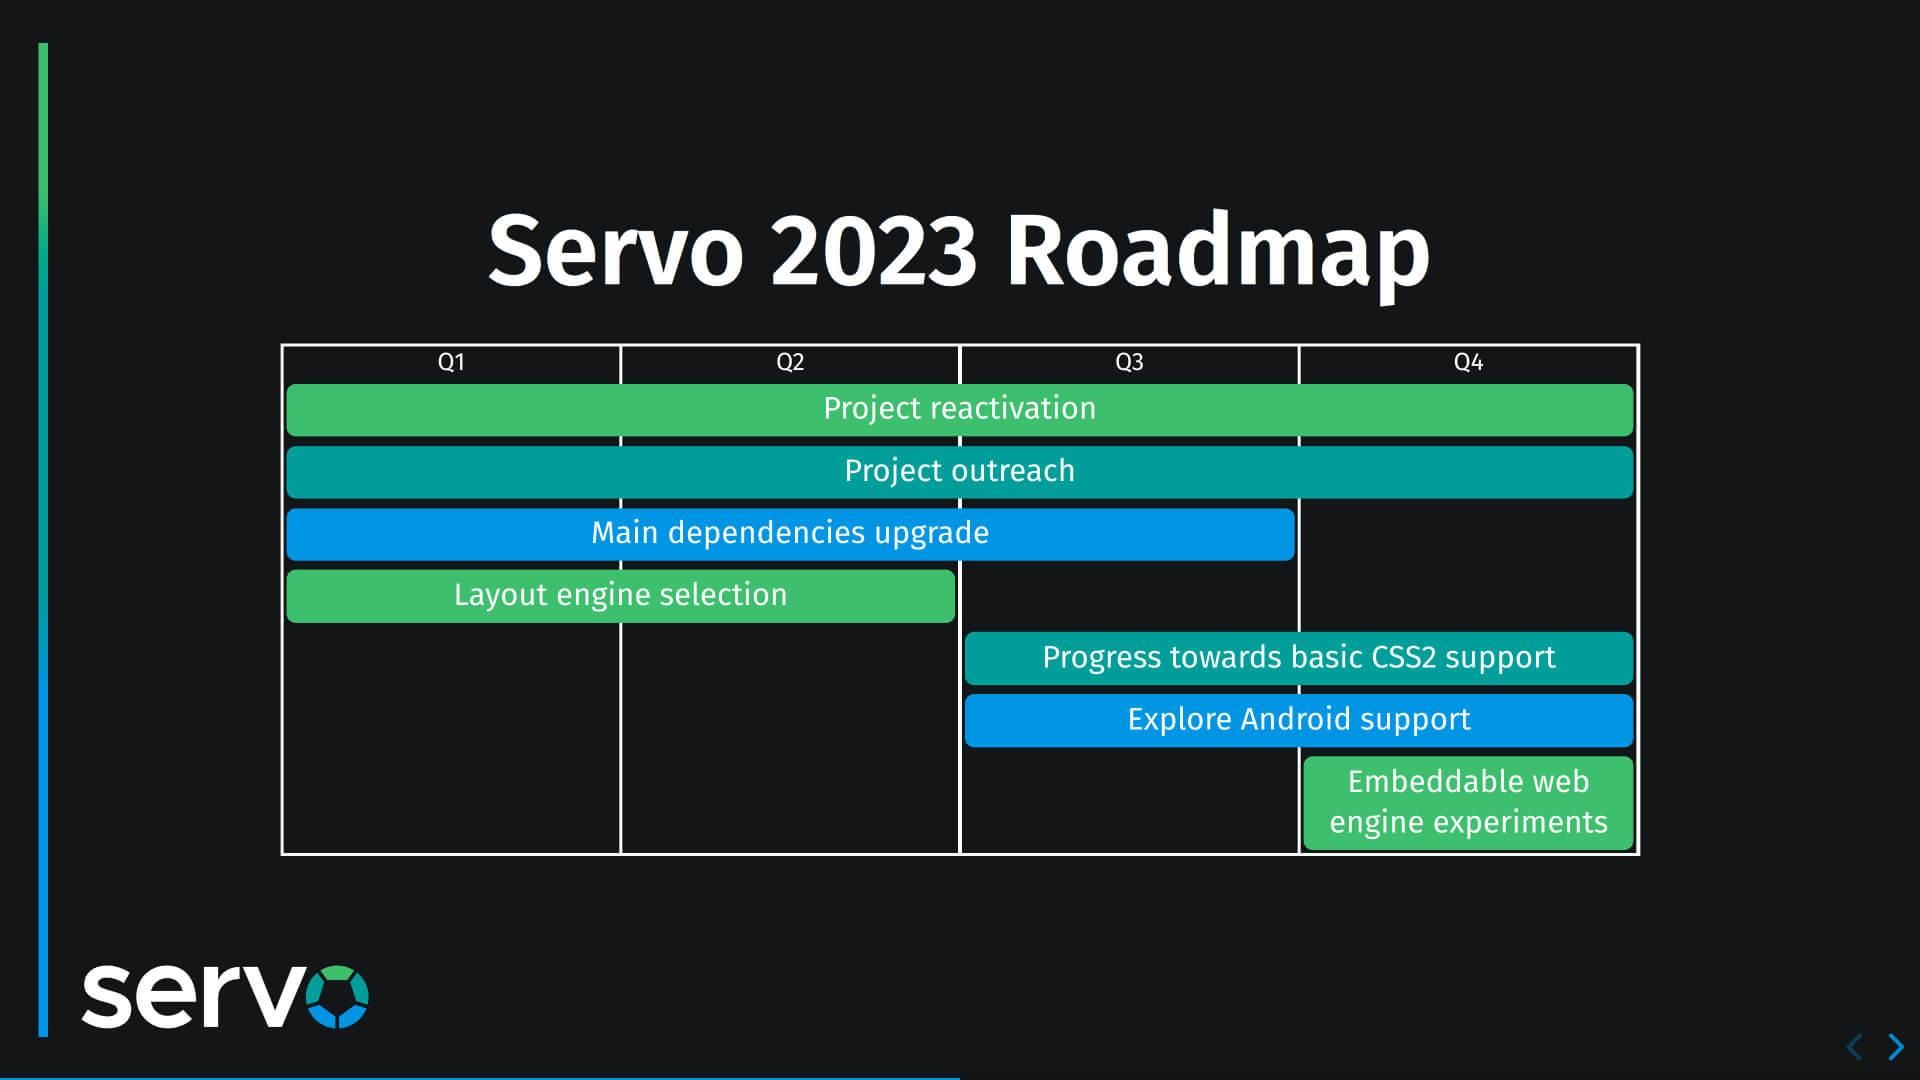 2023's roadmap for the servo project